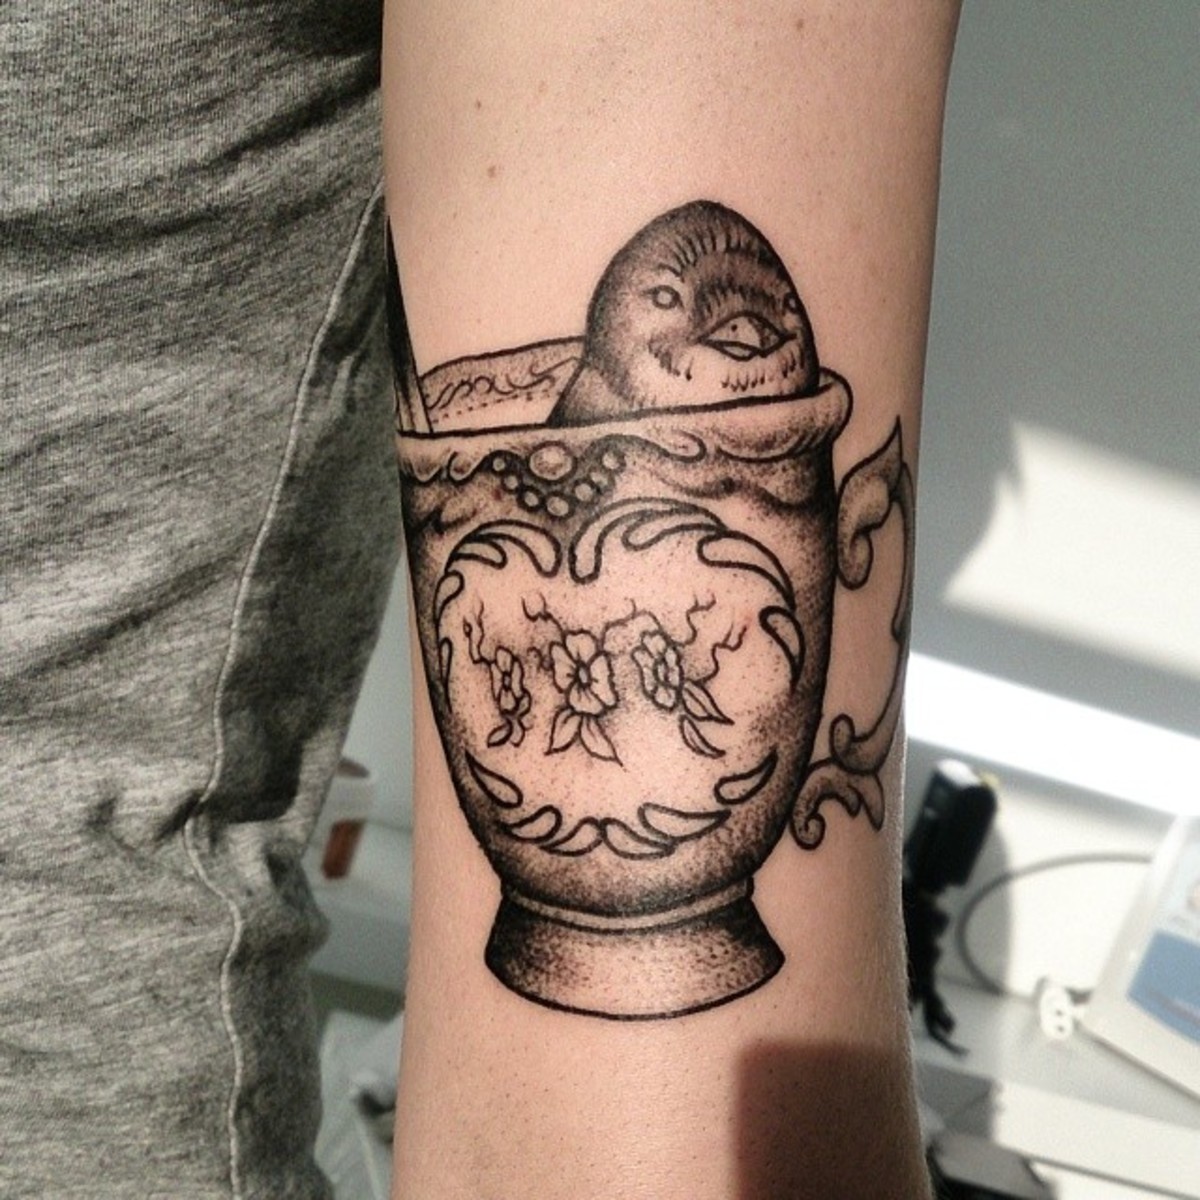 A tattoo of a bird peeping out of a teacup.